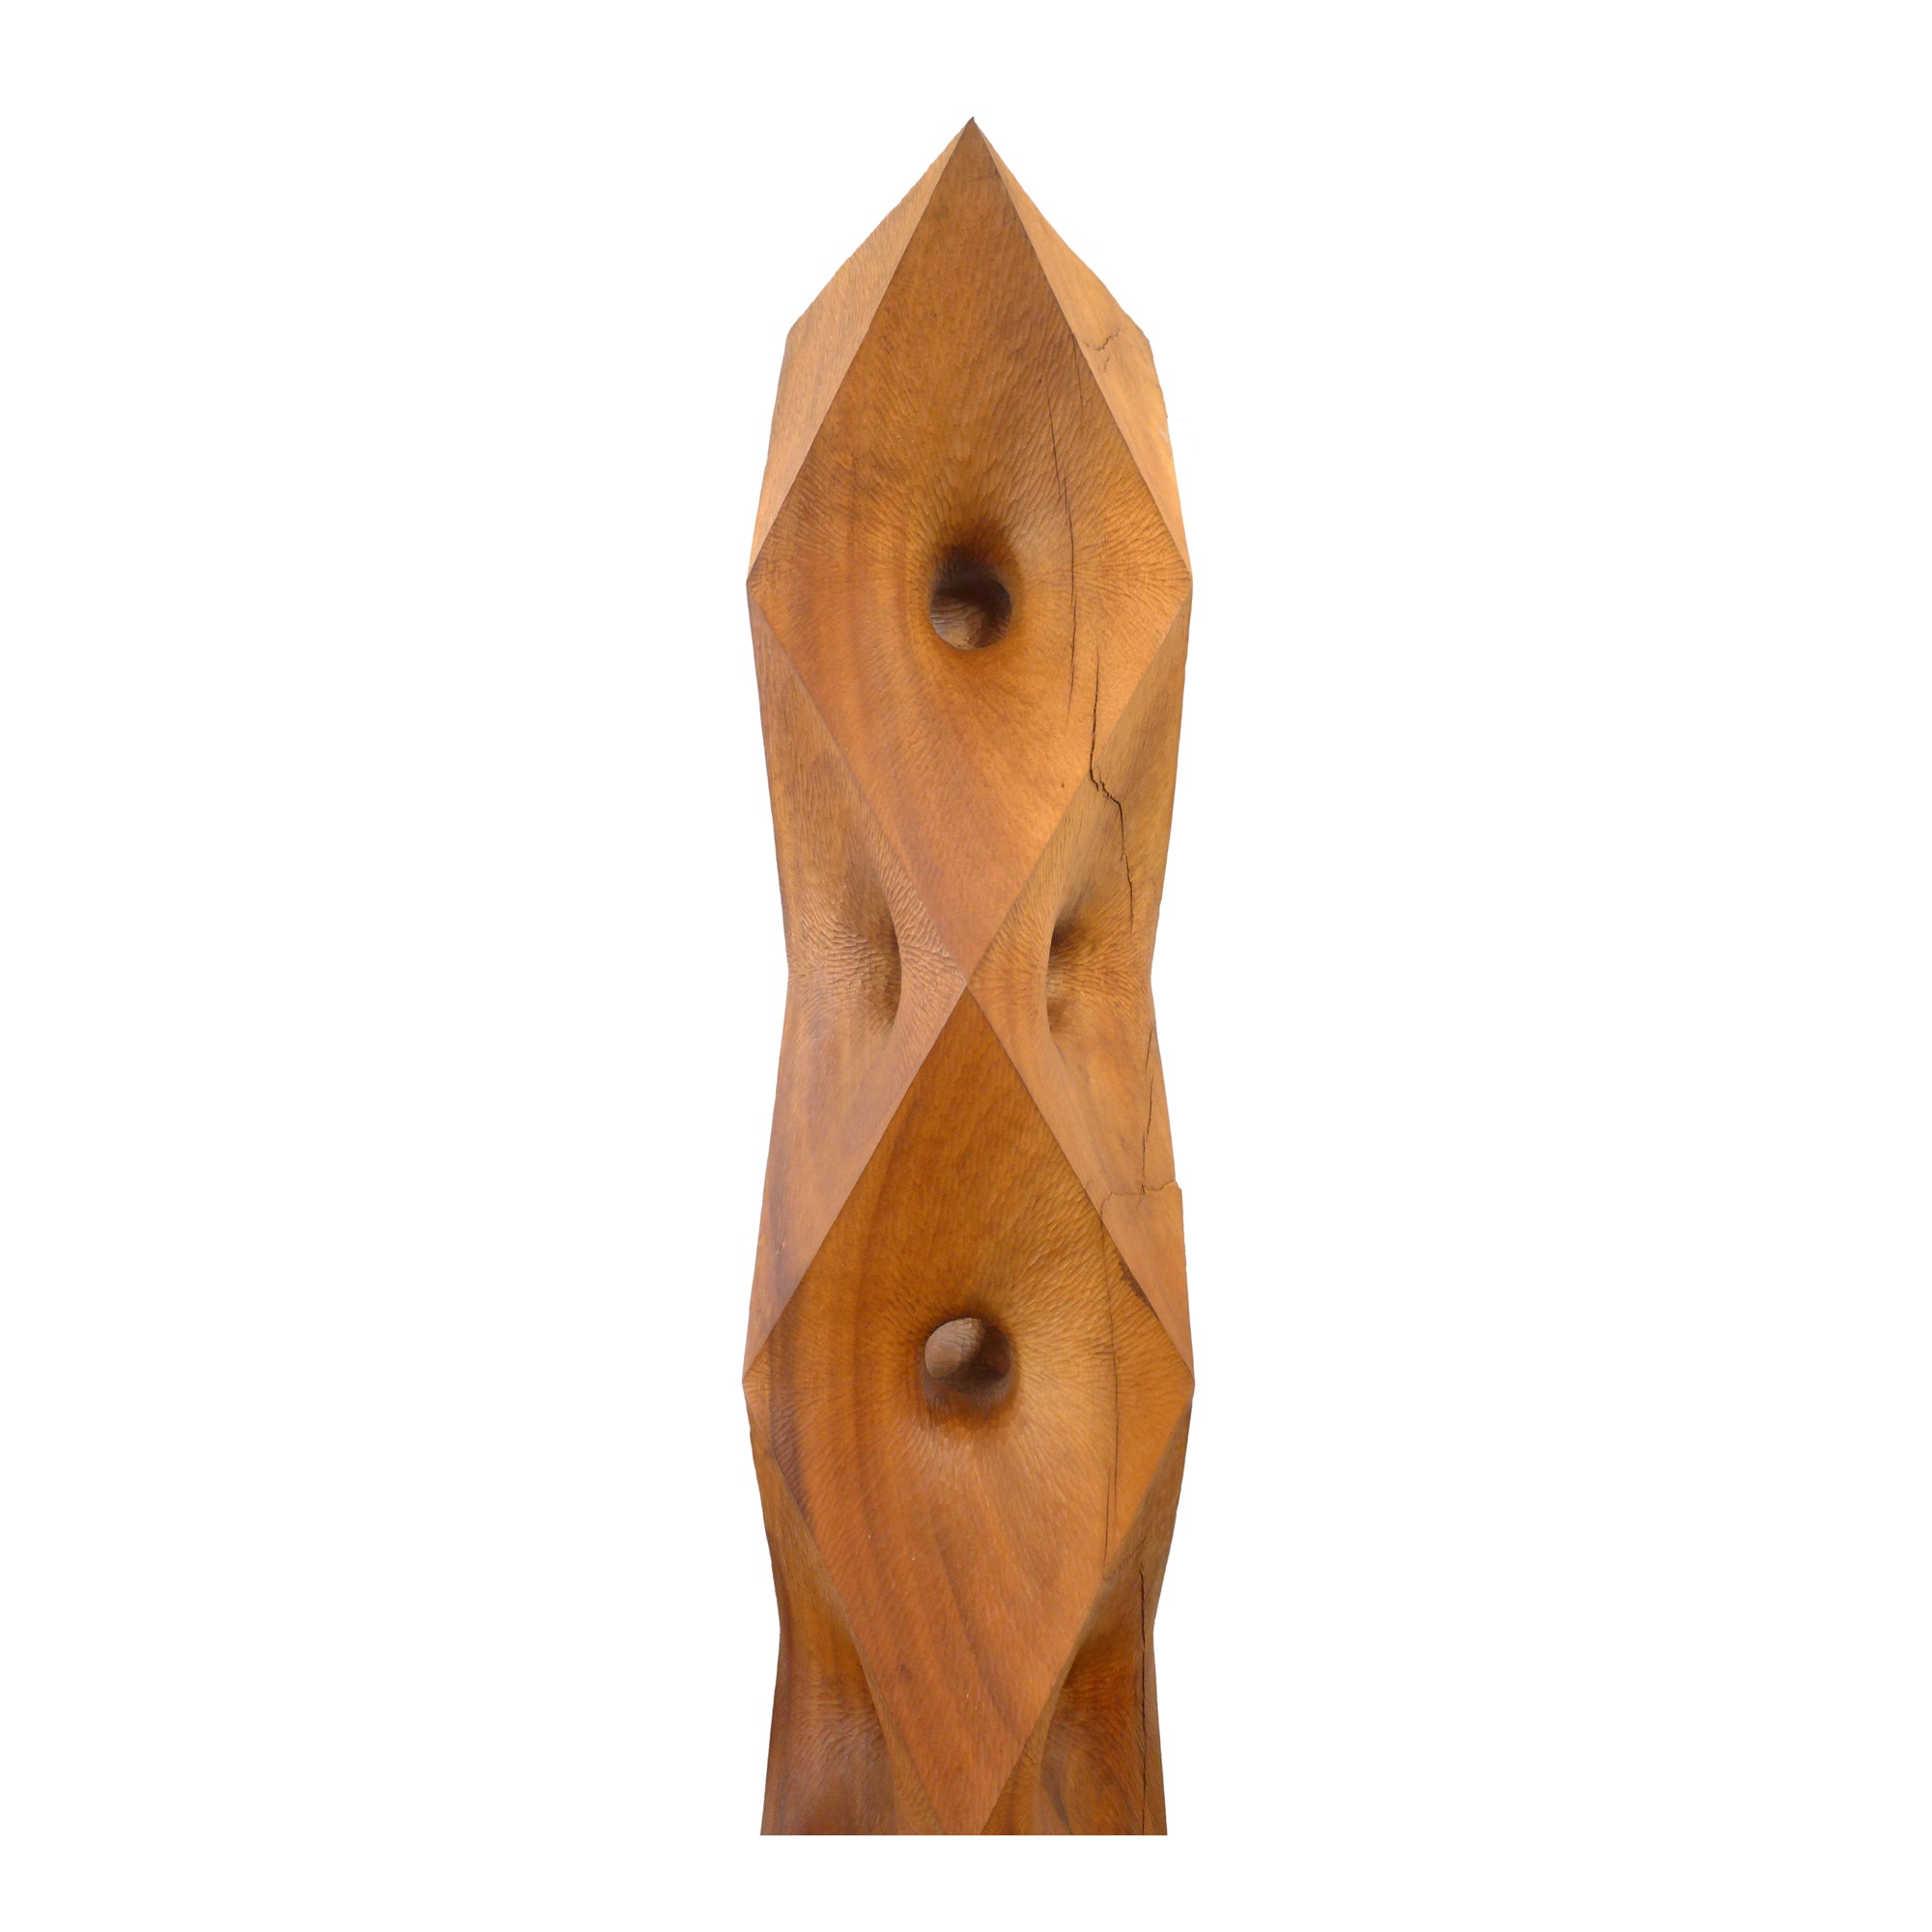 Monumental Contemporary Carved Wood "Hard/Soft" Totem Sculpture by Aleph Geddis